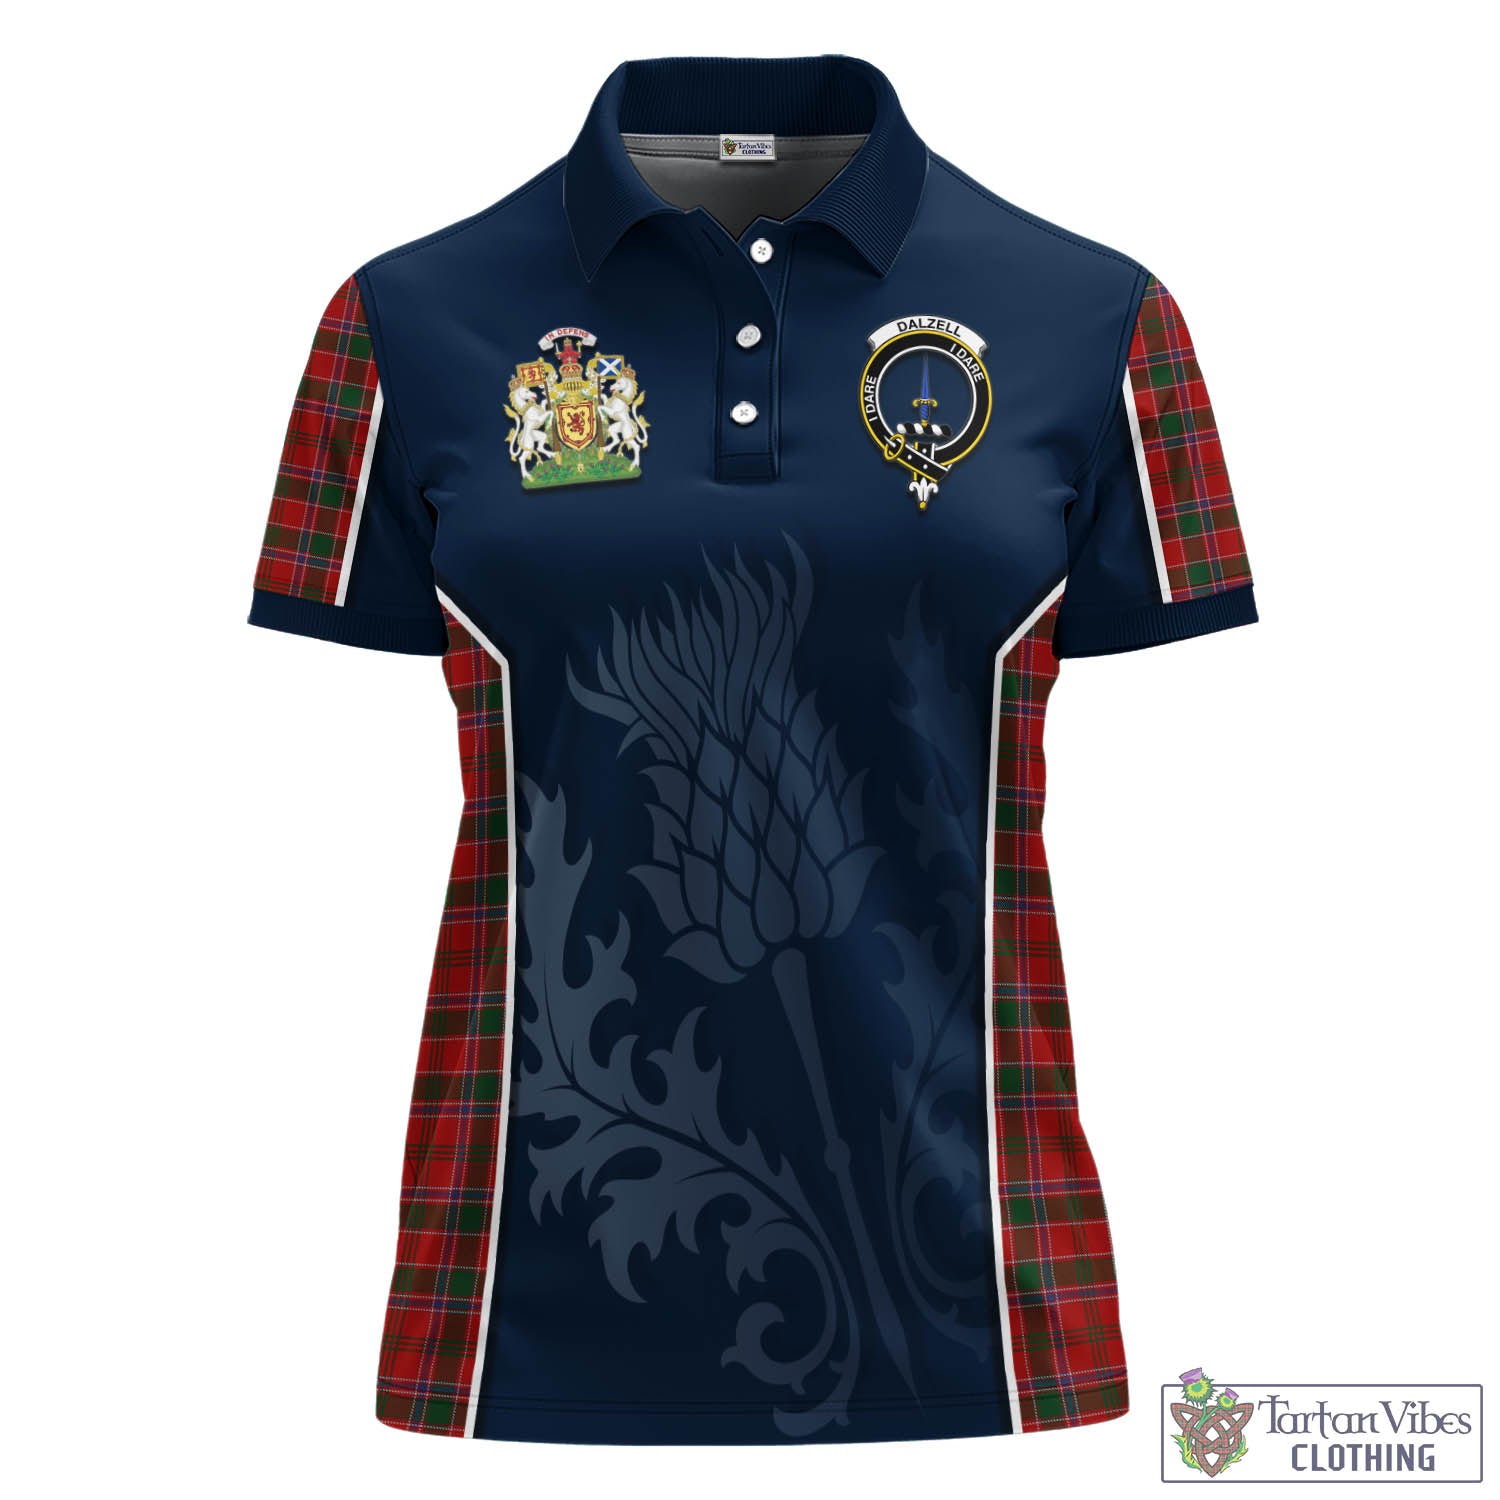 Tartan Vibes Clothing Dalzell (Dalziel) Tartan Women's Polo Shirt with Family Crest and Scottish Thistle Vibes Sport Style